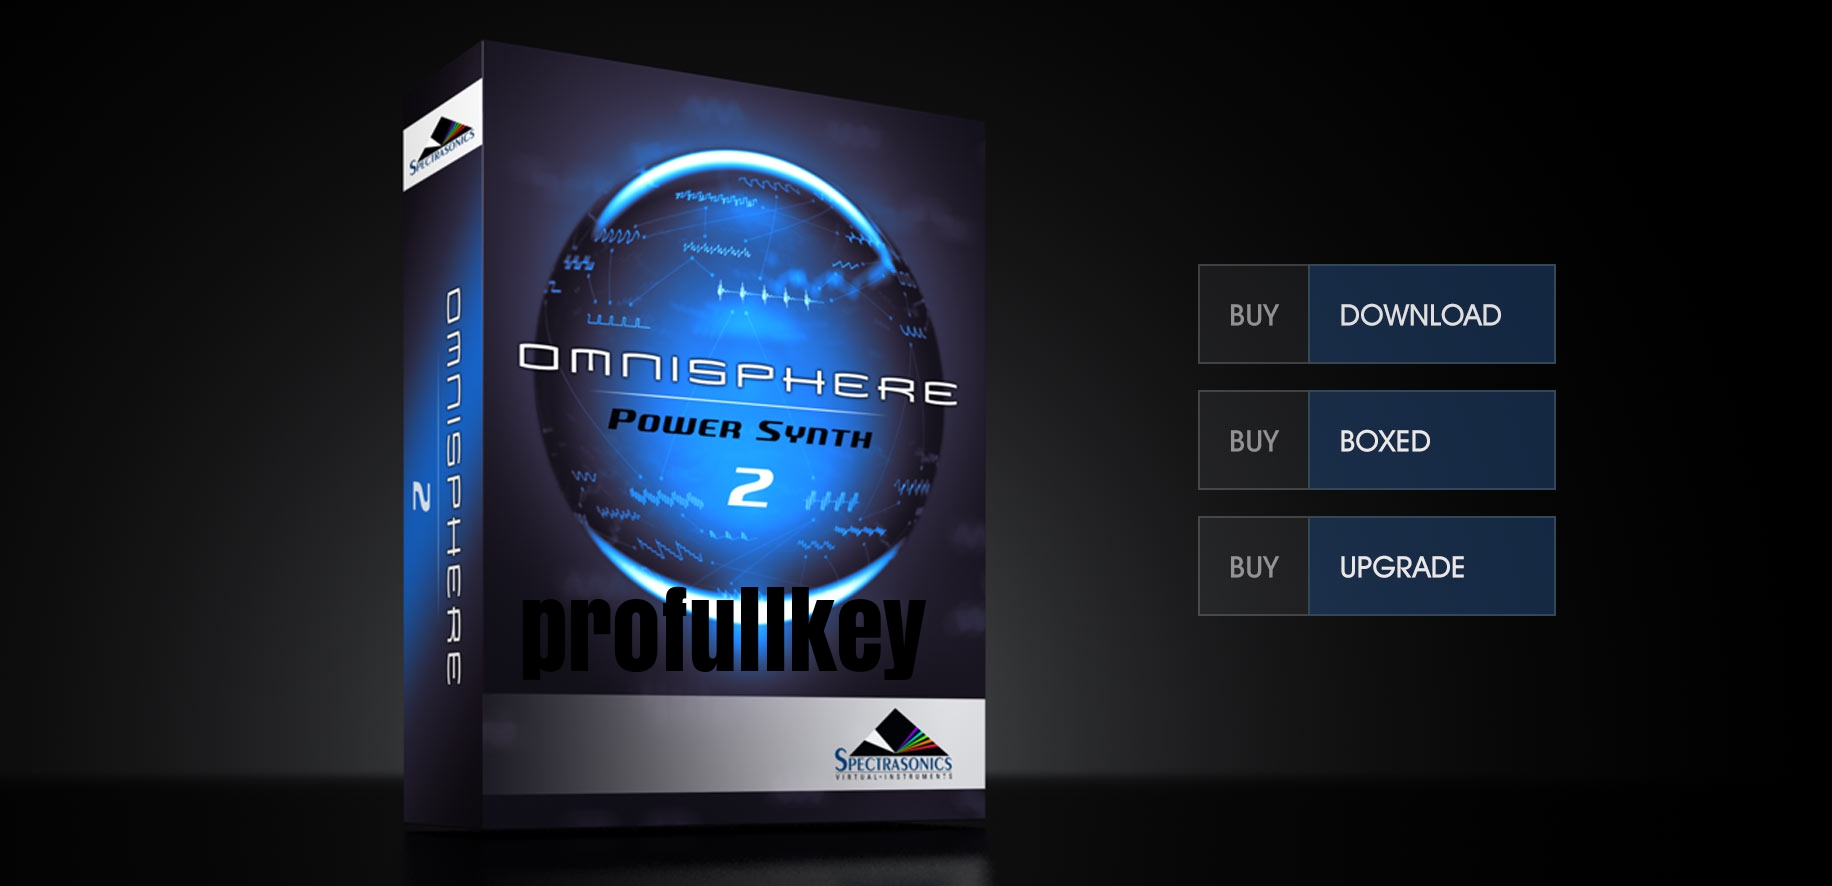 How to patch omnisphere plugins